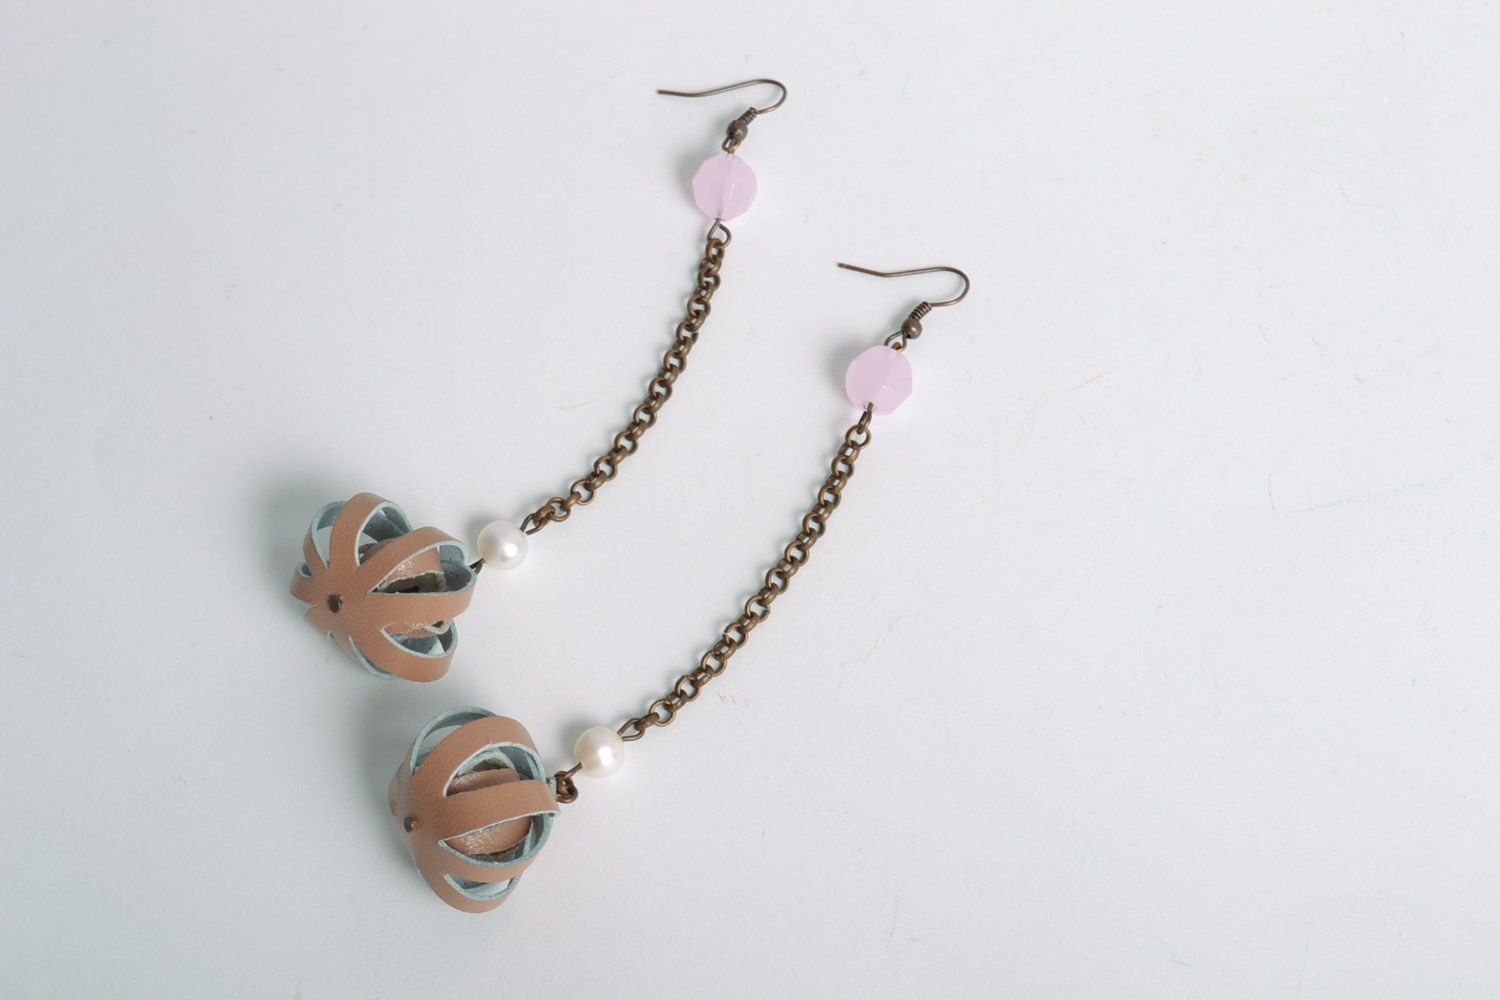 Handmade long earrings with leather charms and natural stones photo 2